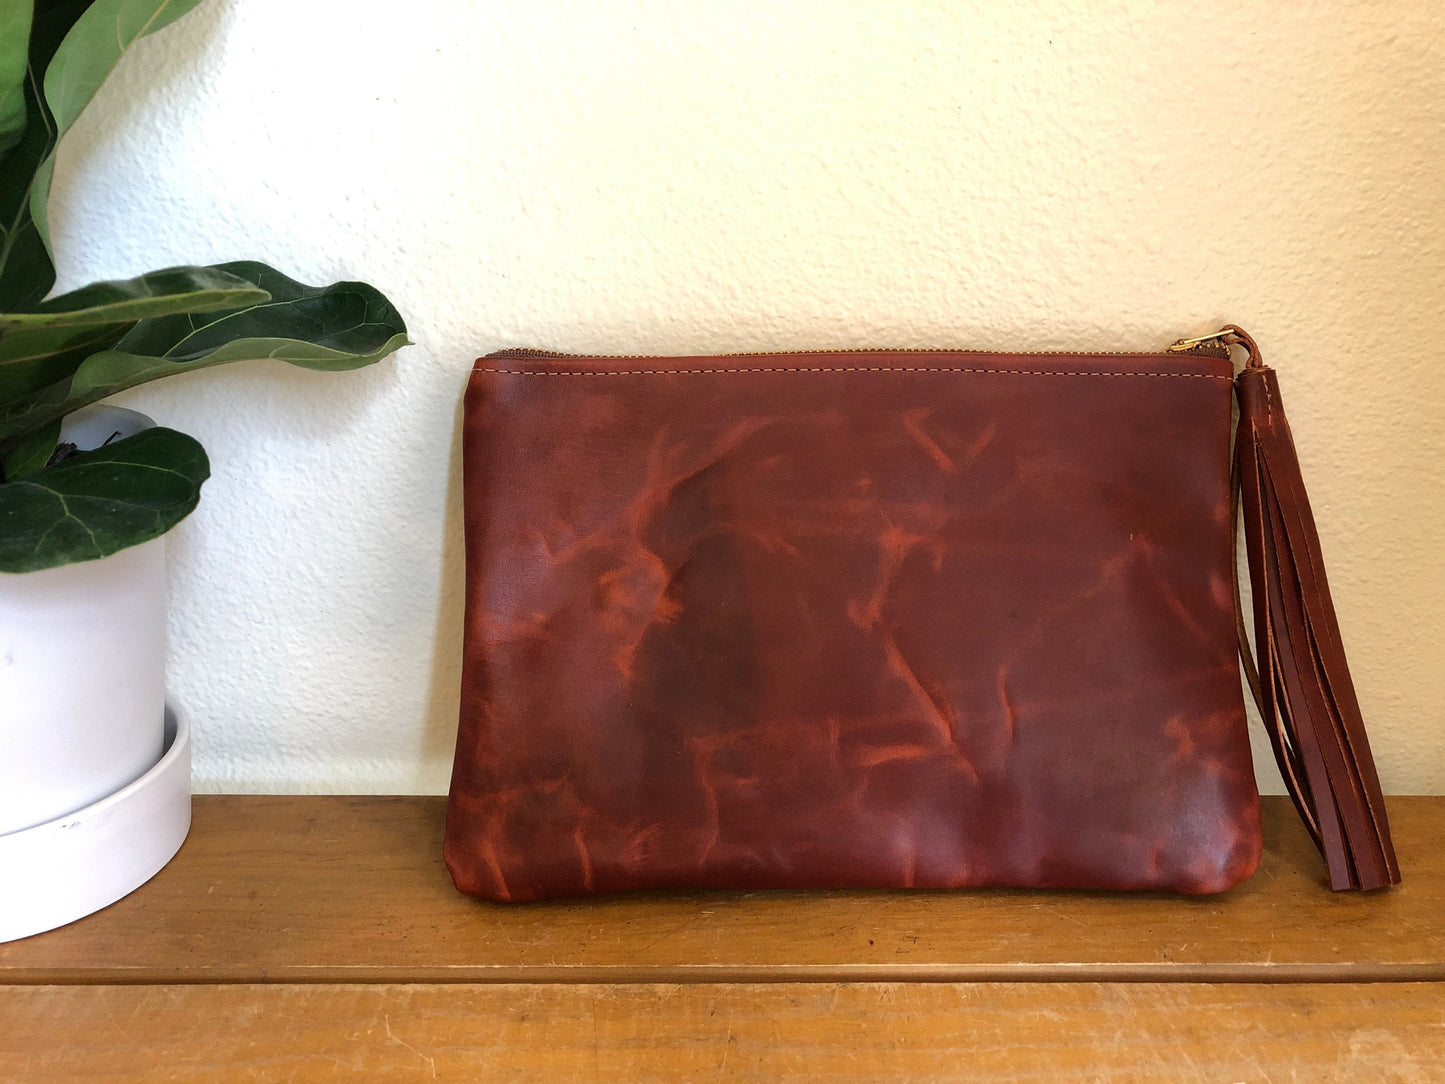 Distressed brown leather clutch with tassel leaning against a white wall on wood table with a plant